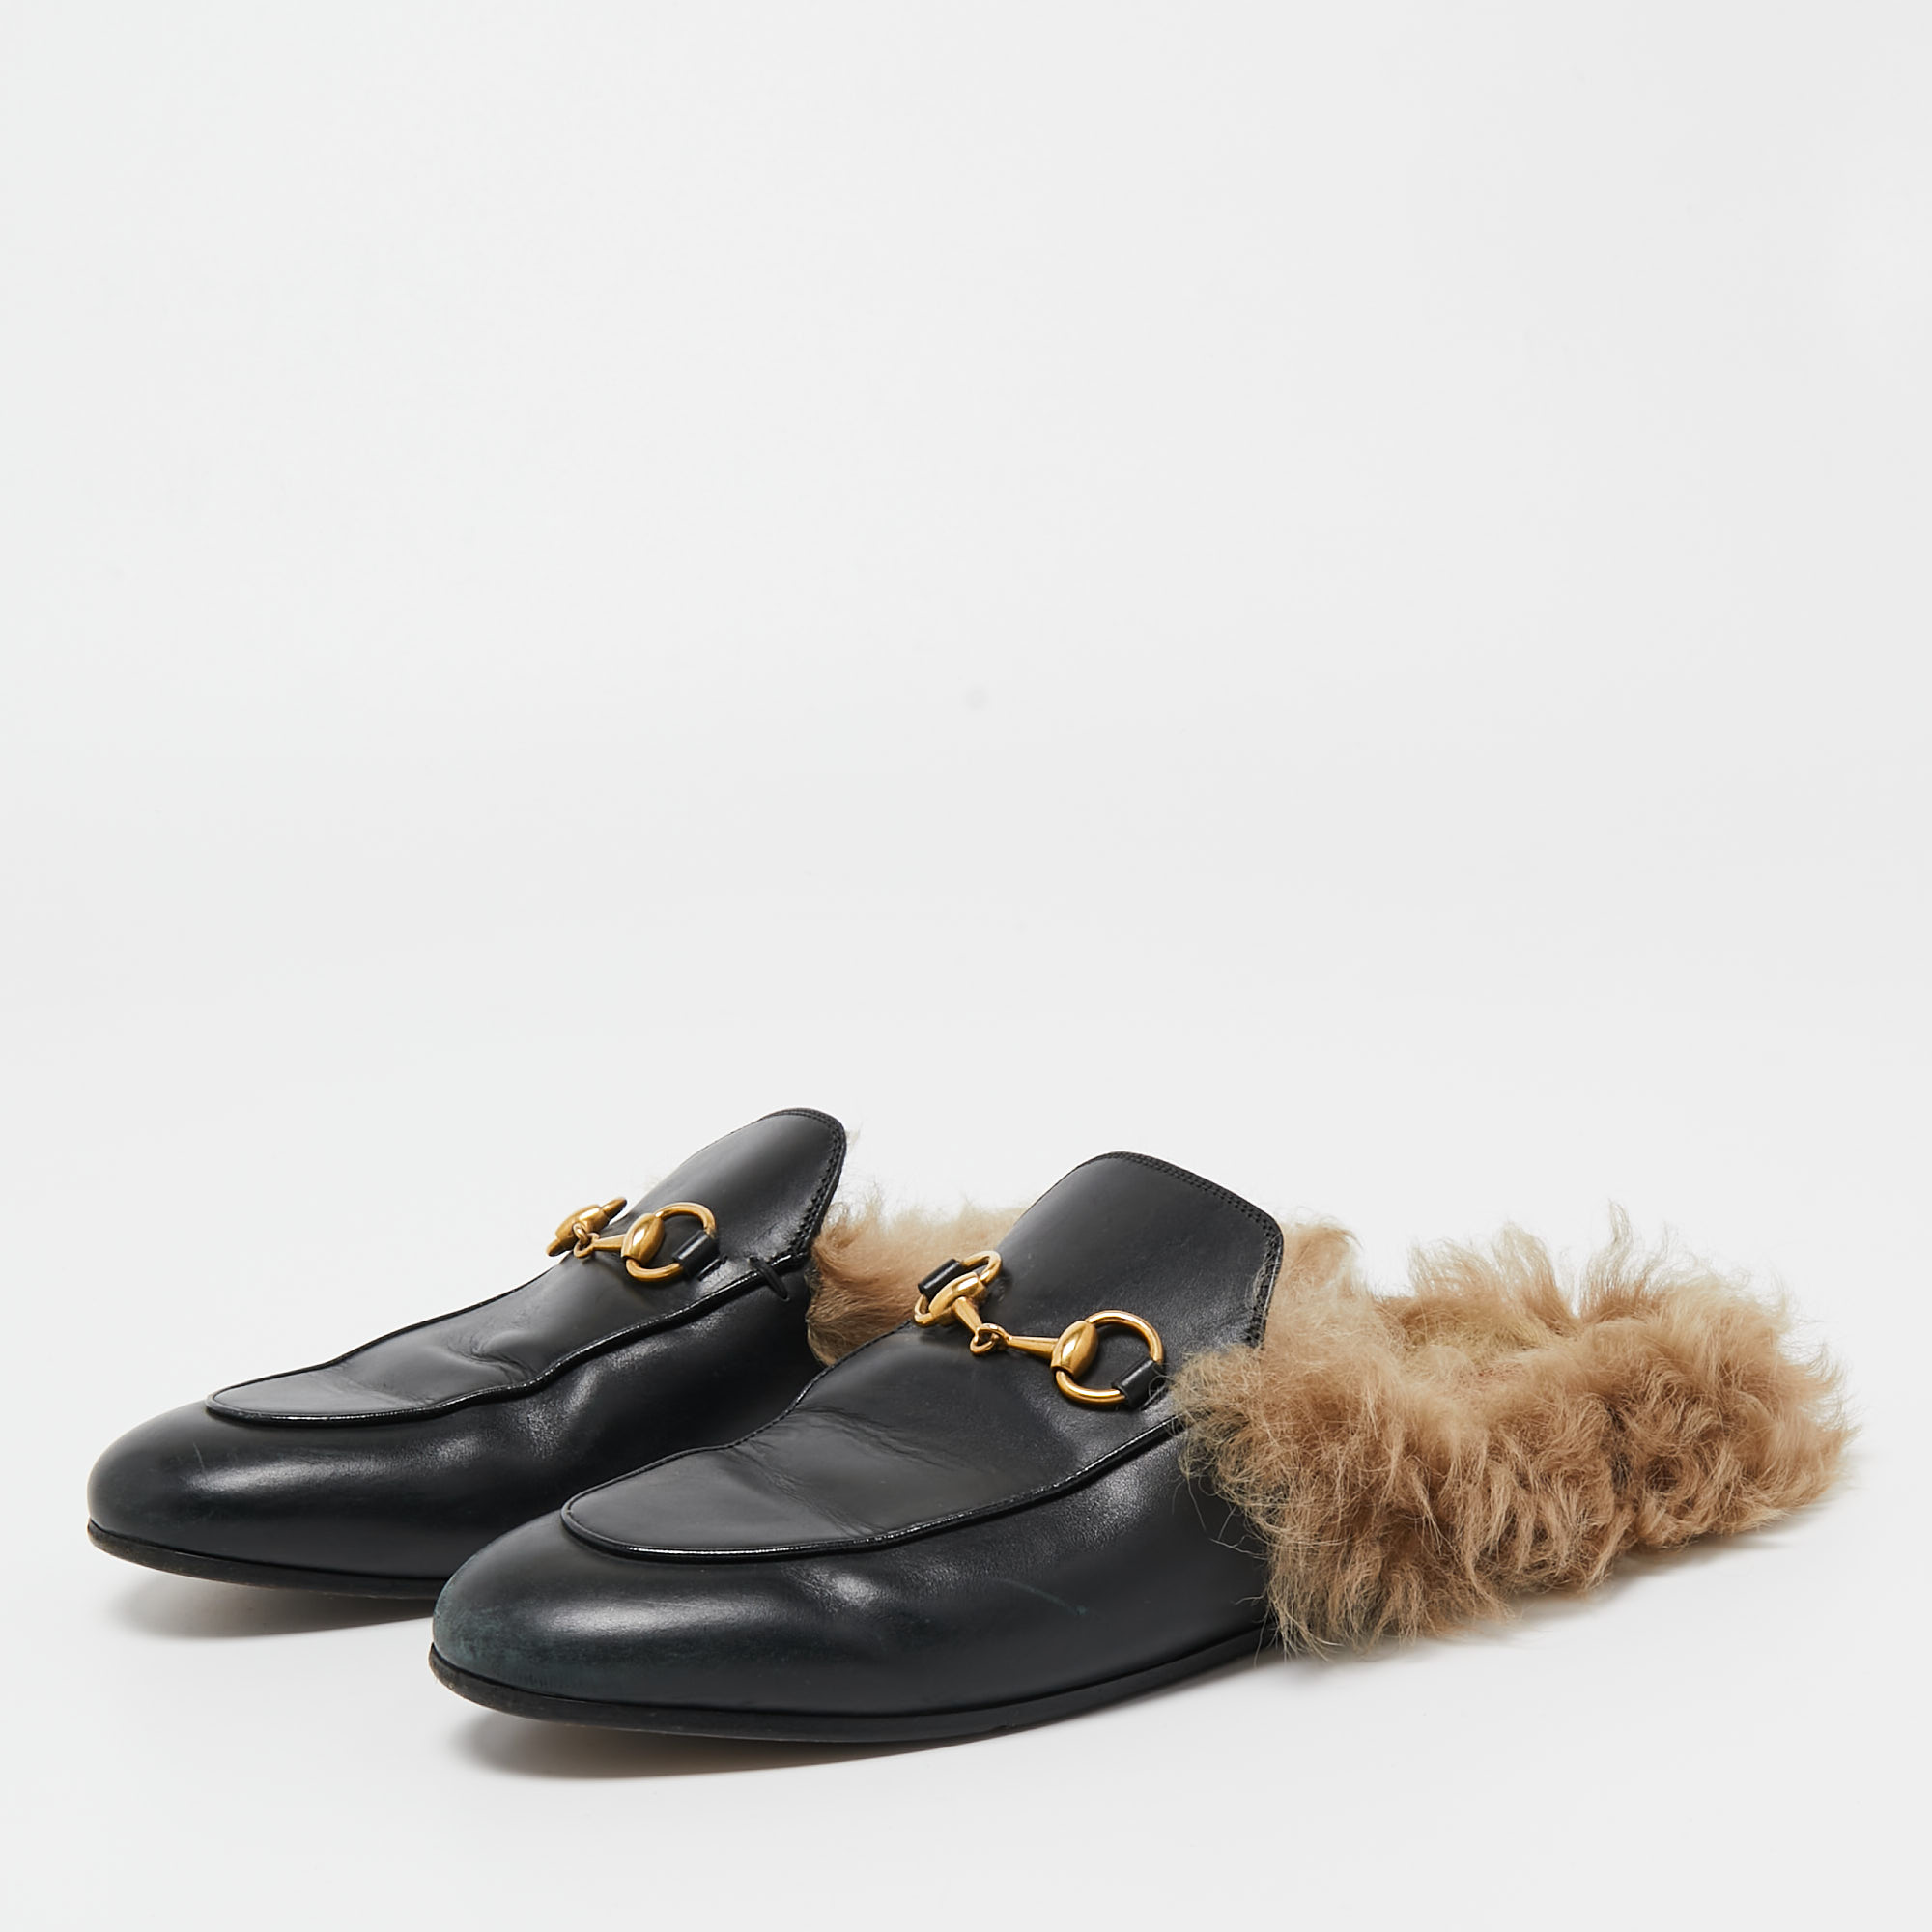 

Gucci Black Leather and Fur Princetown Horsebit Flat Mules Size